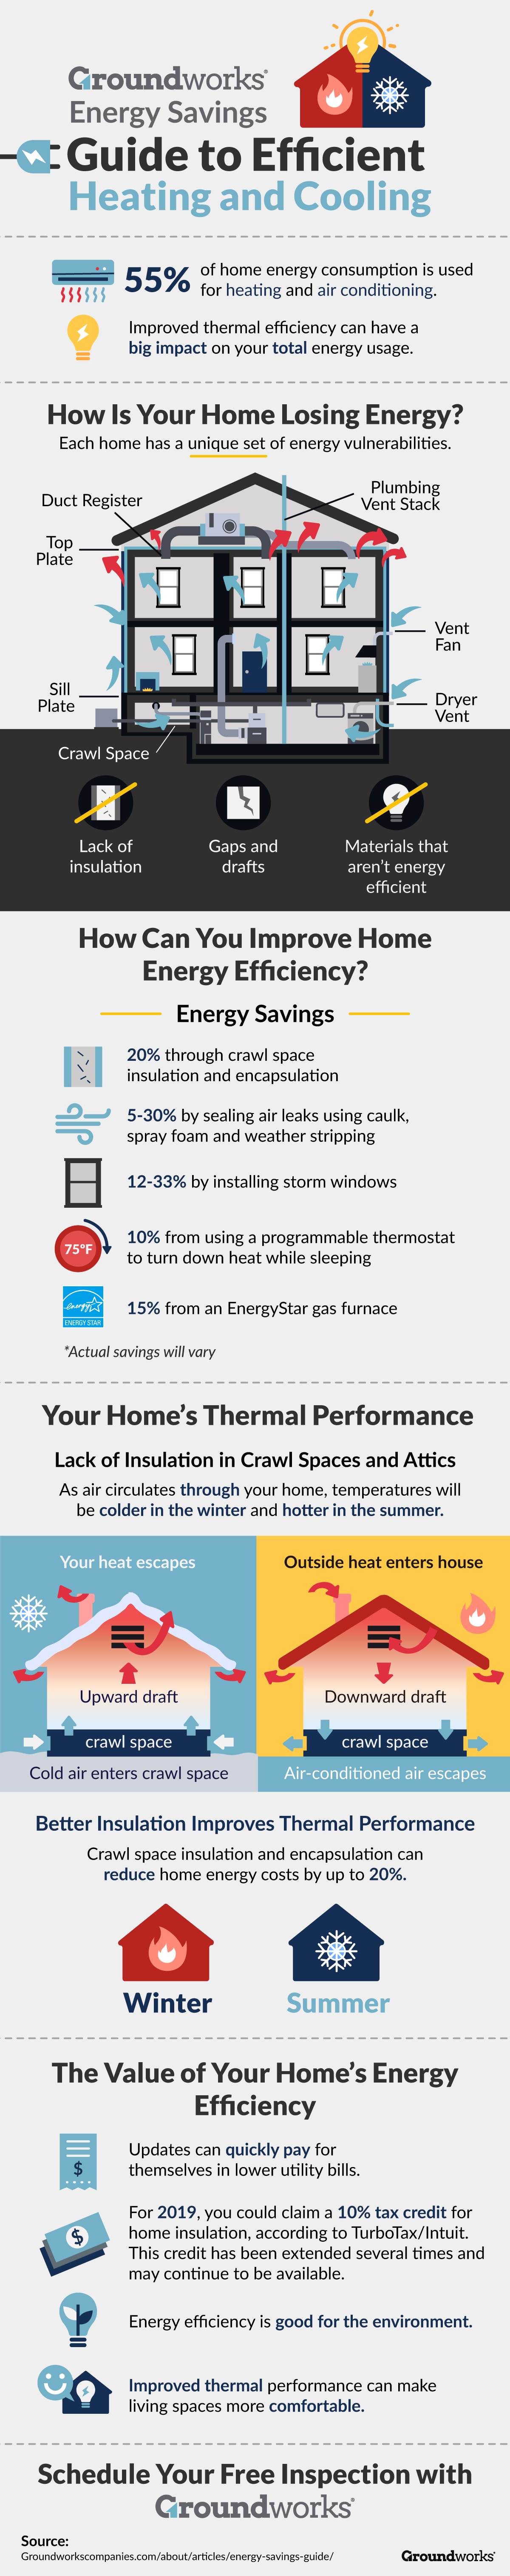 Energy Savings Tips for Homeowners to Reduce Heating and Cooling Costs